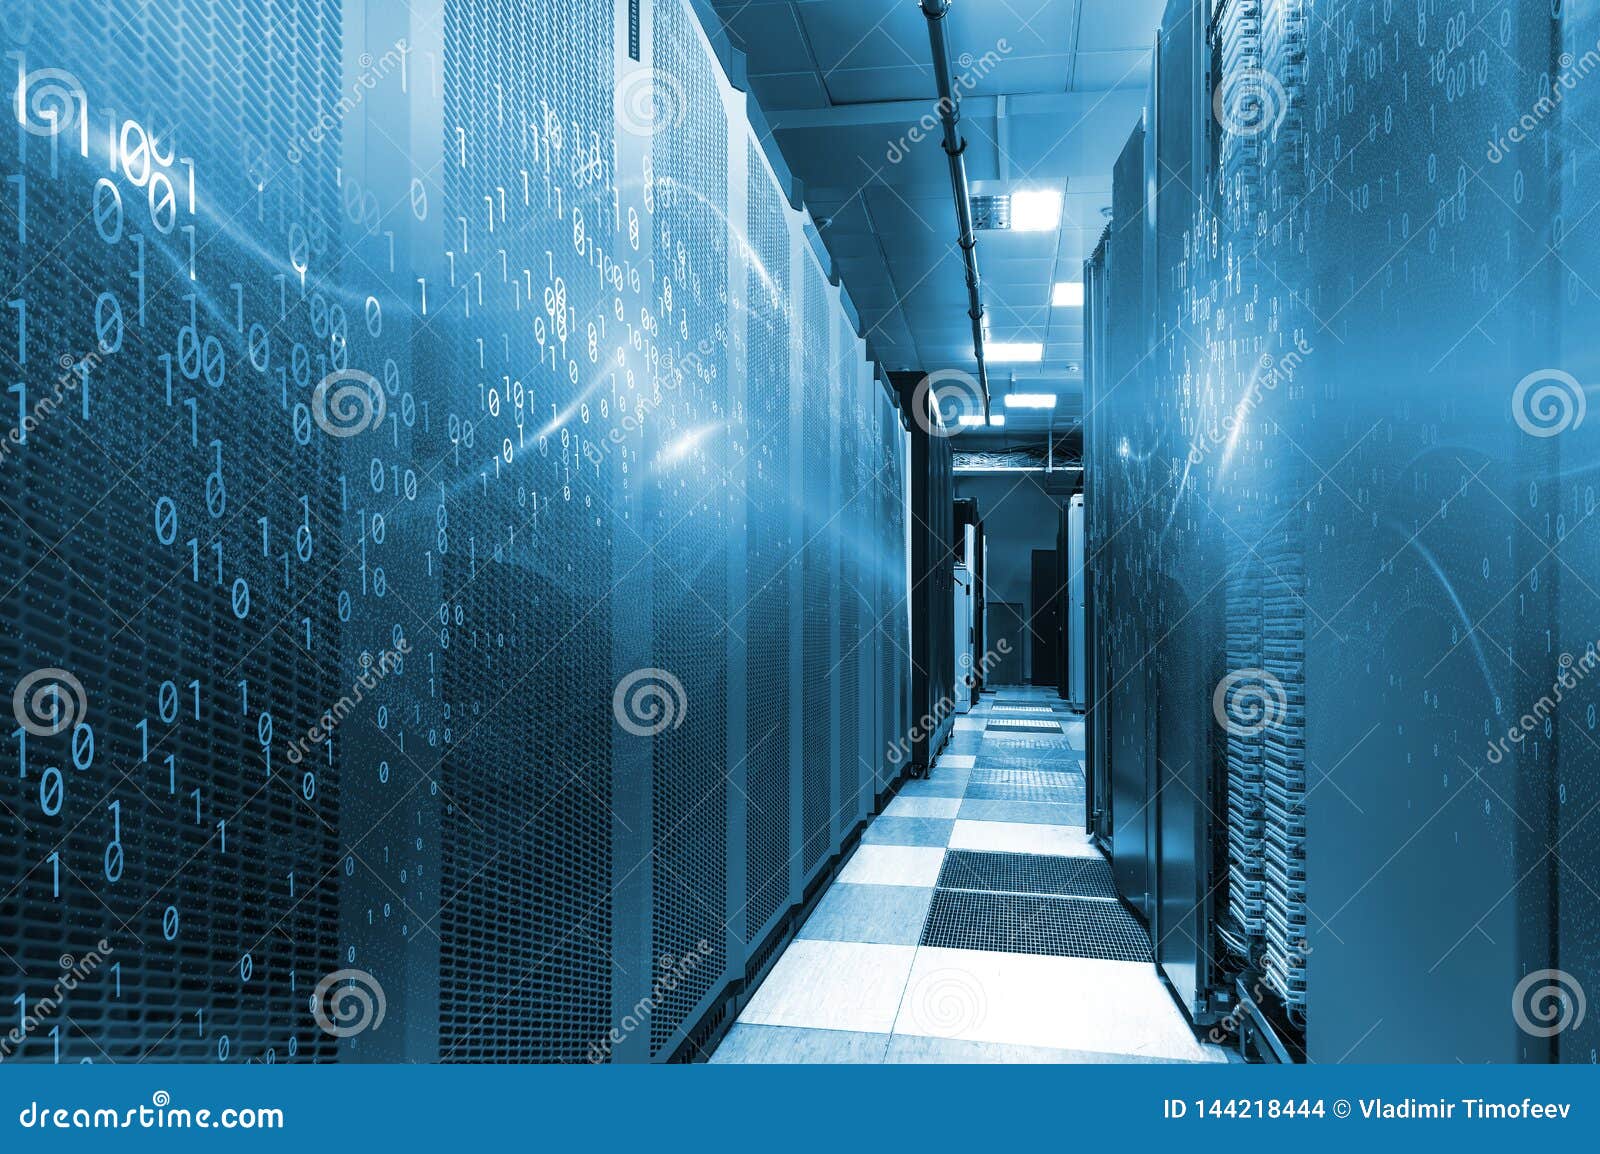 server room in big data center with binary code . modern interior super computer for digital communications and internet in